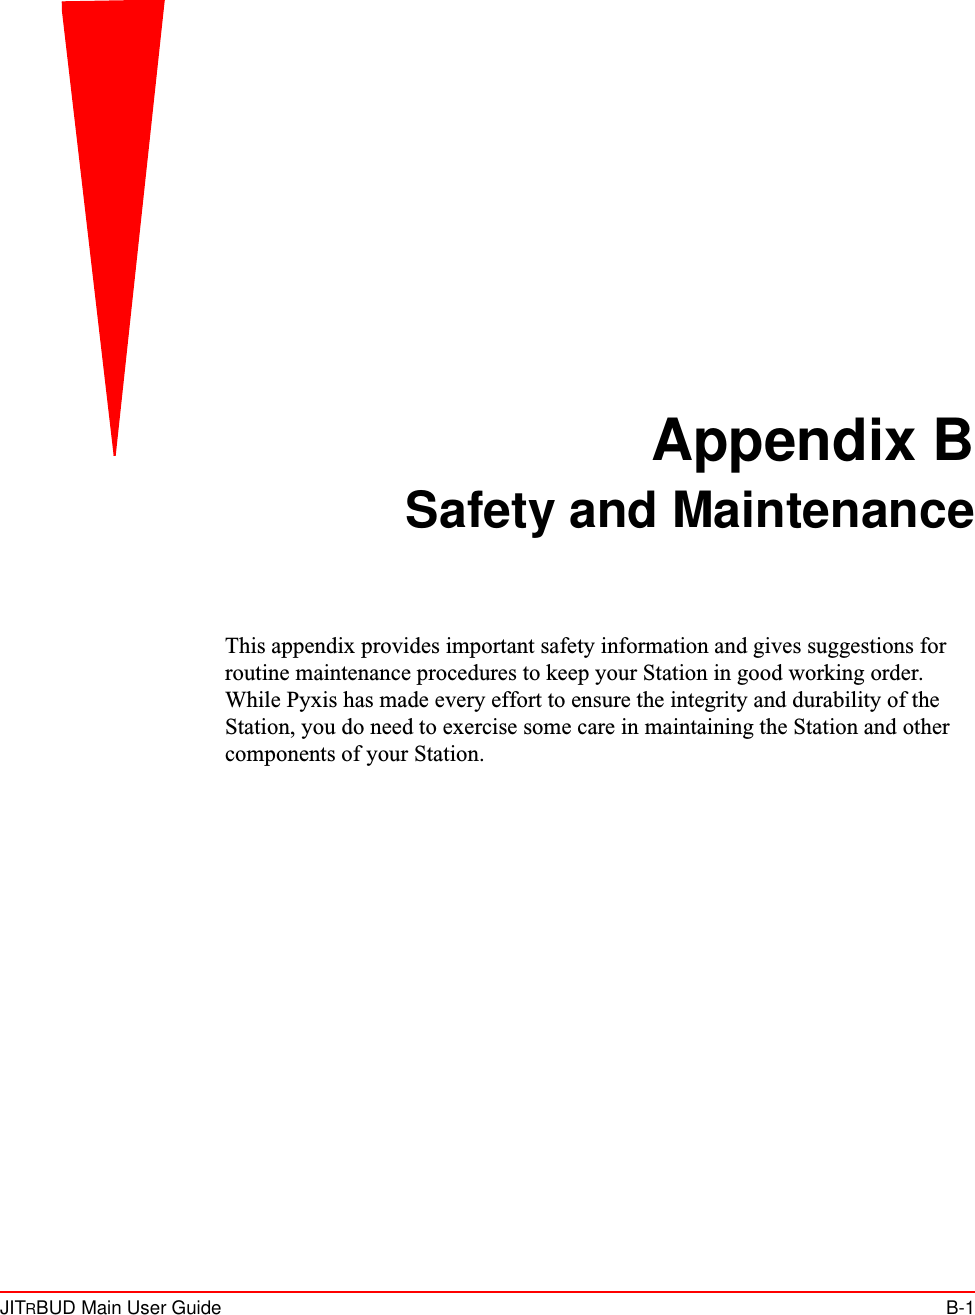 JITRBUD Main User Guide B-1Appendix BSafety and MaintenanceThis appendix provides important safety information and gives suggestions for routine maintenance procedures to keep your Station in good working order. While Pyxis has made every effort to ensure the integrity and durability of the Station, you do need to exercise some care in maintaining the Station and other components of your Station.